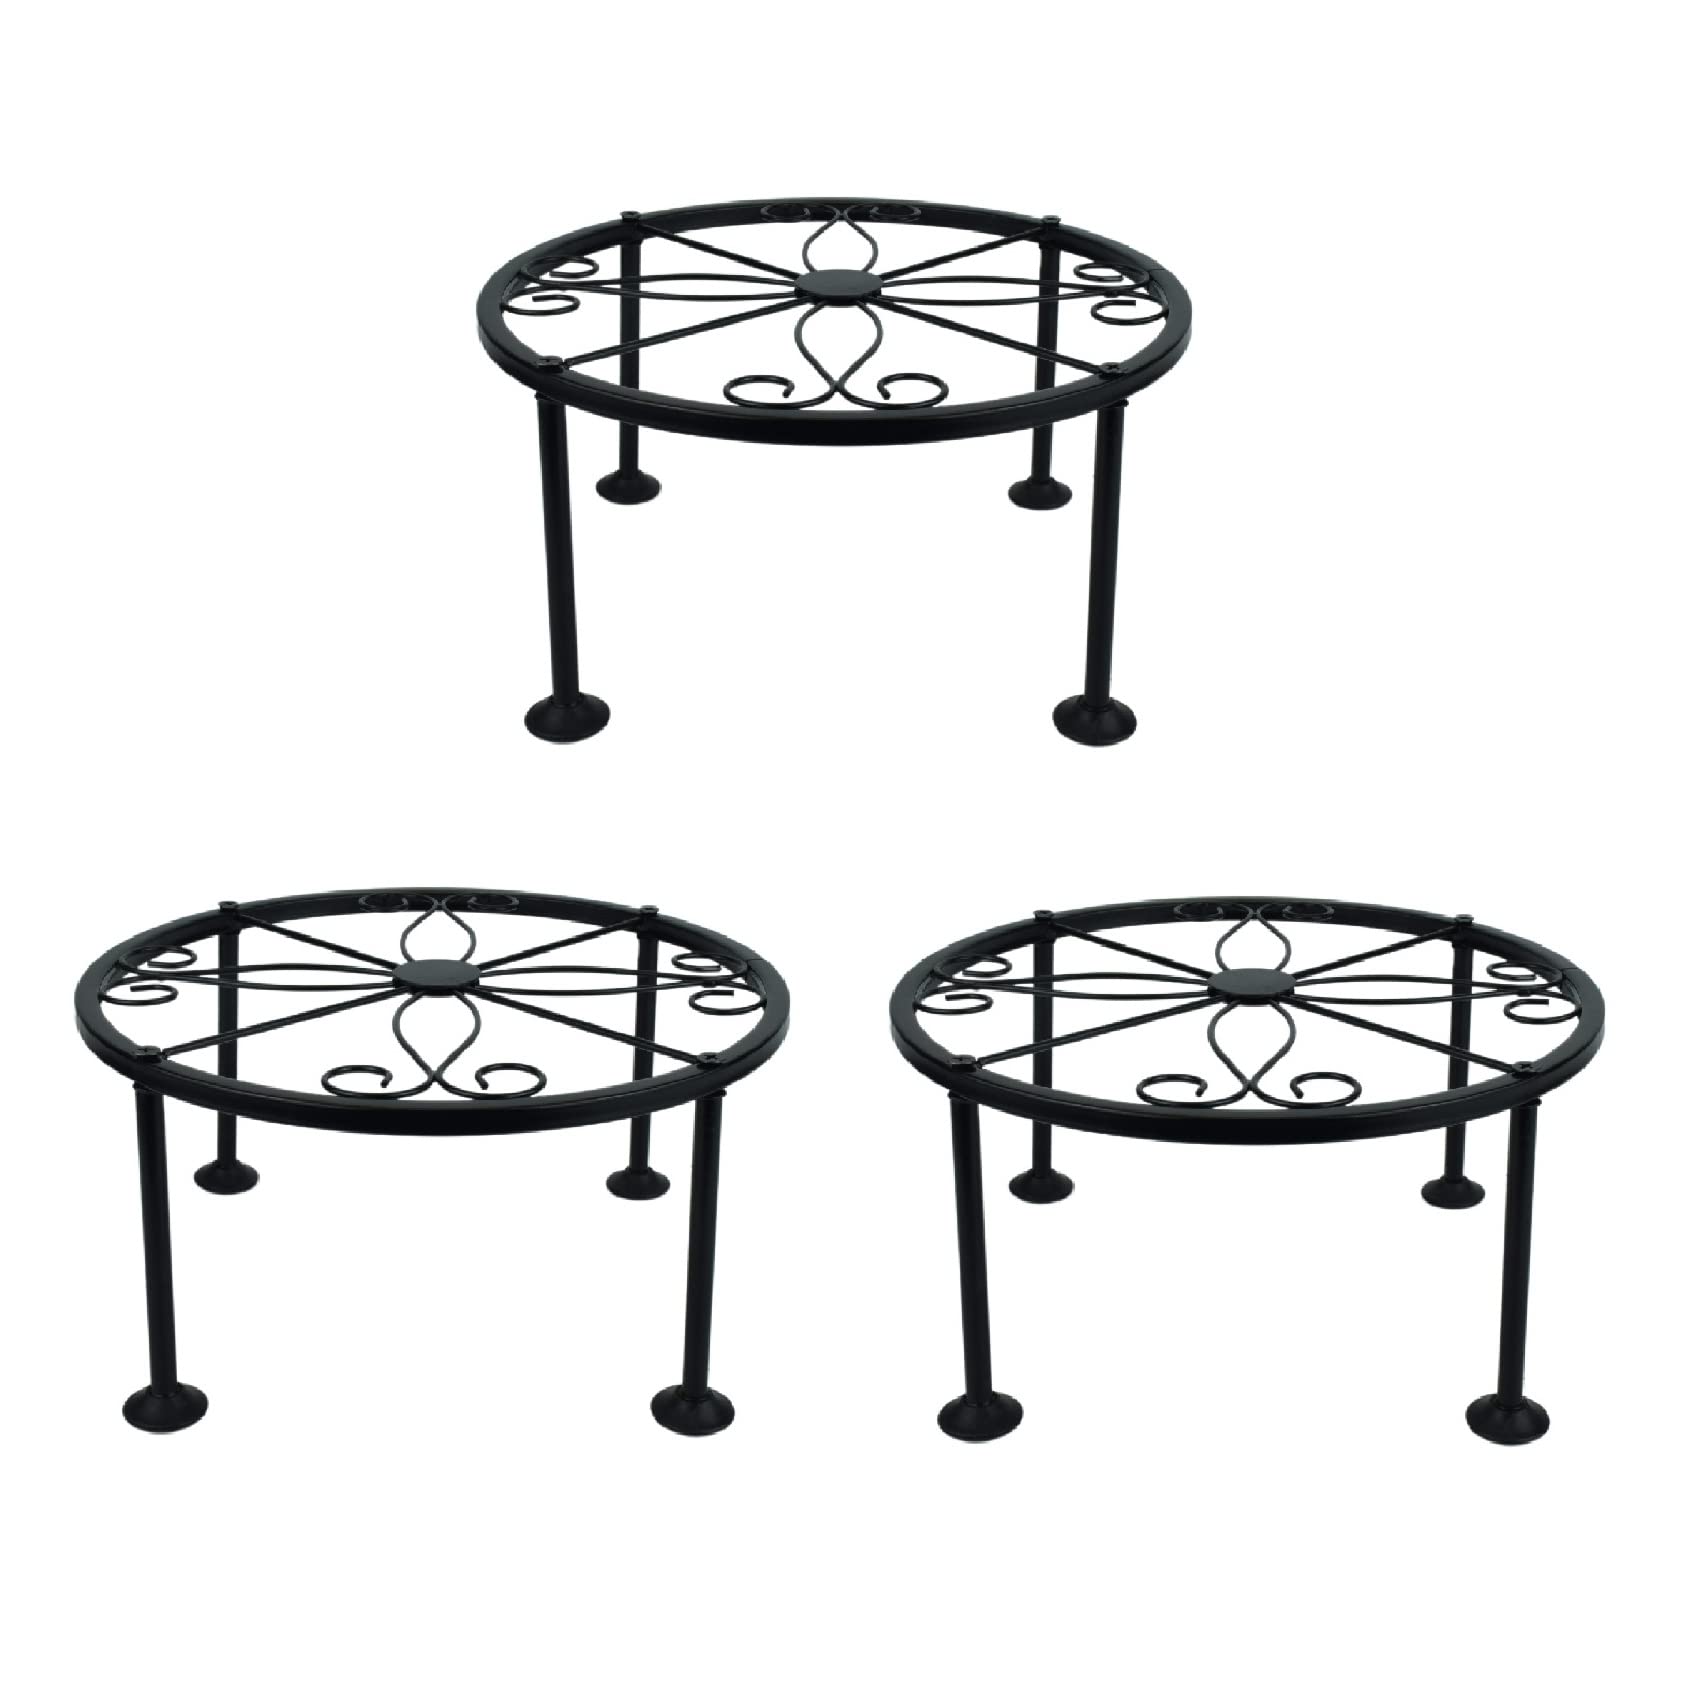 FOHOLA 3 Pack Potted Plant Stand, Rustproof Iron Black Potted Holder Perfect For Heavy Duty Garden Container, Beverage Dispenser, Balco